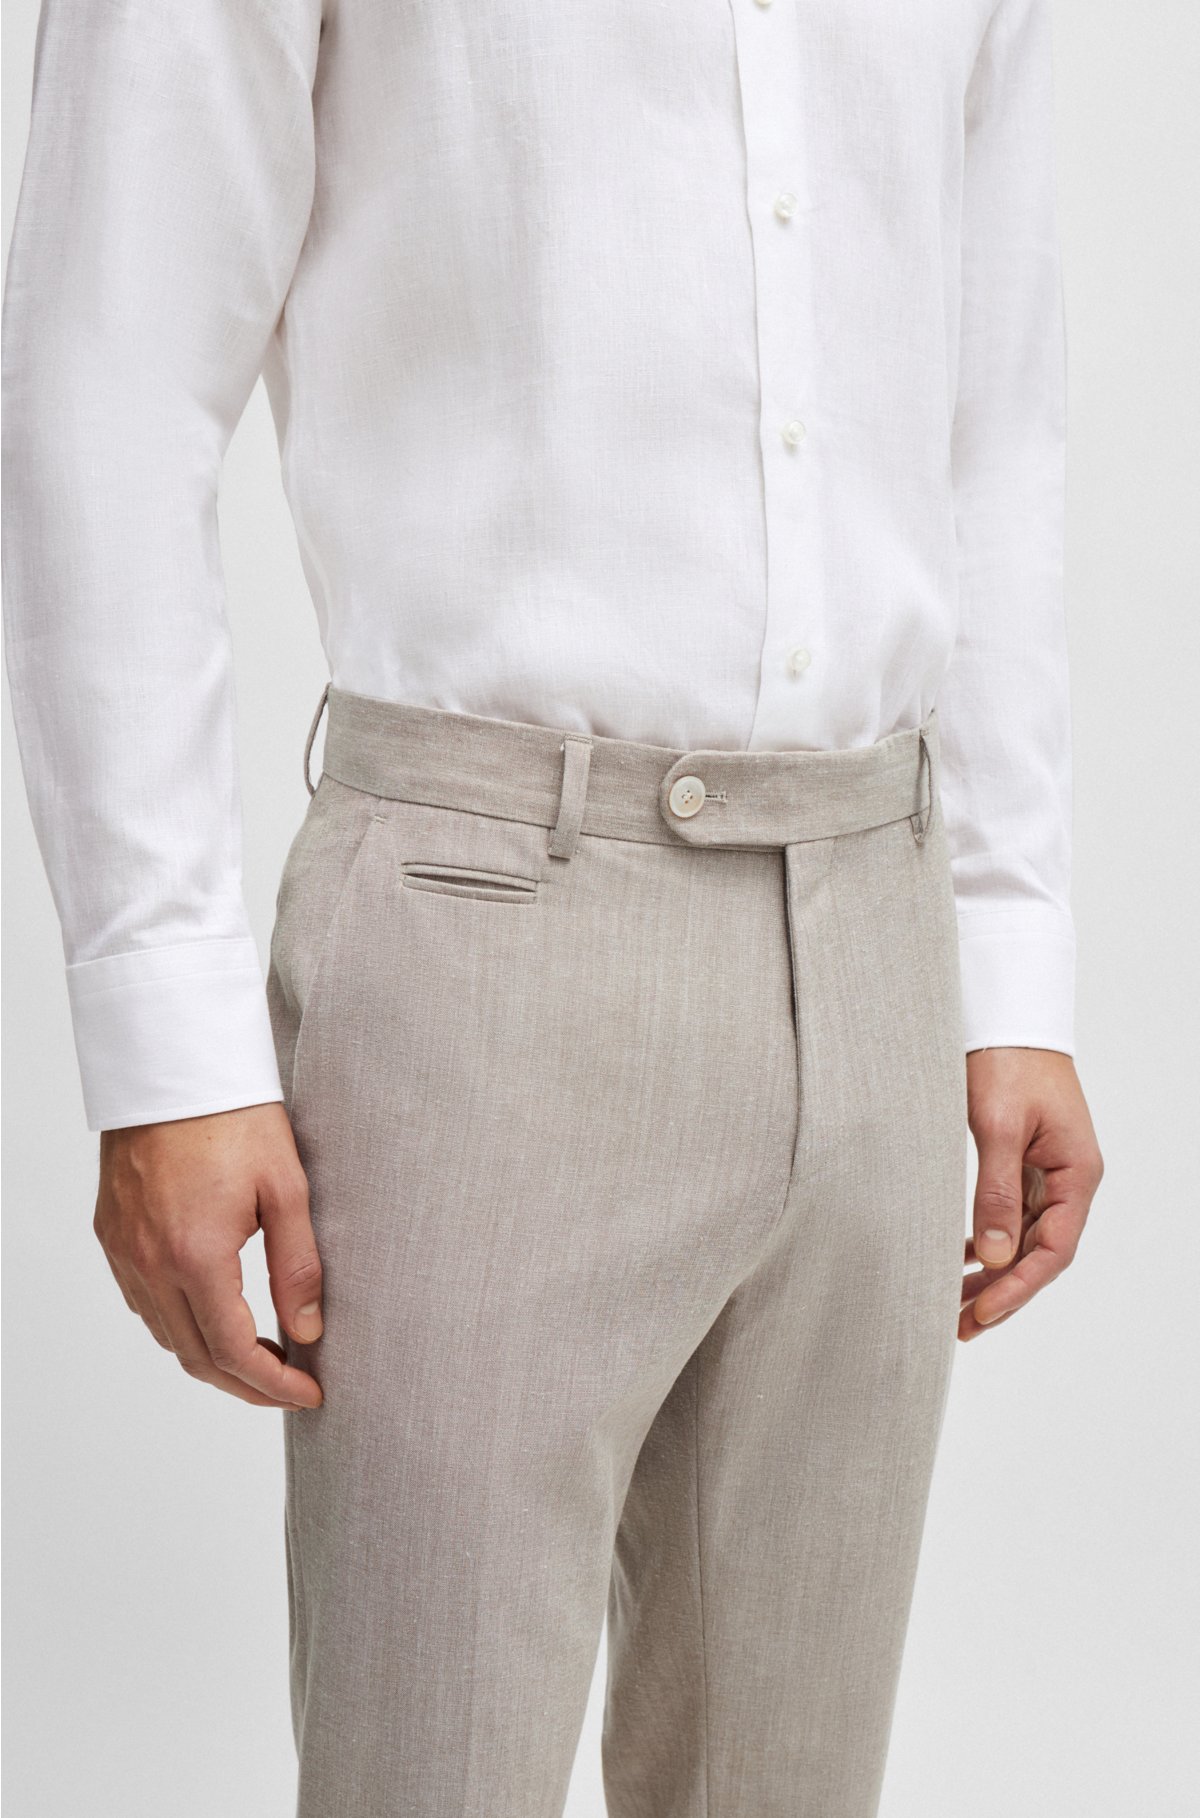 Slim-fit trousers in a micro-patterned cotton blend, Beige